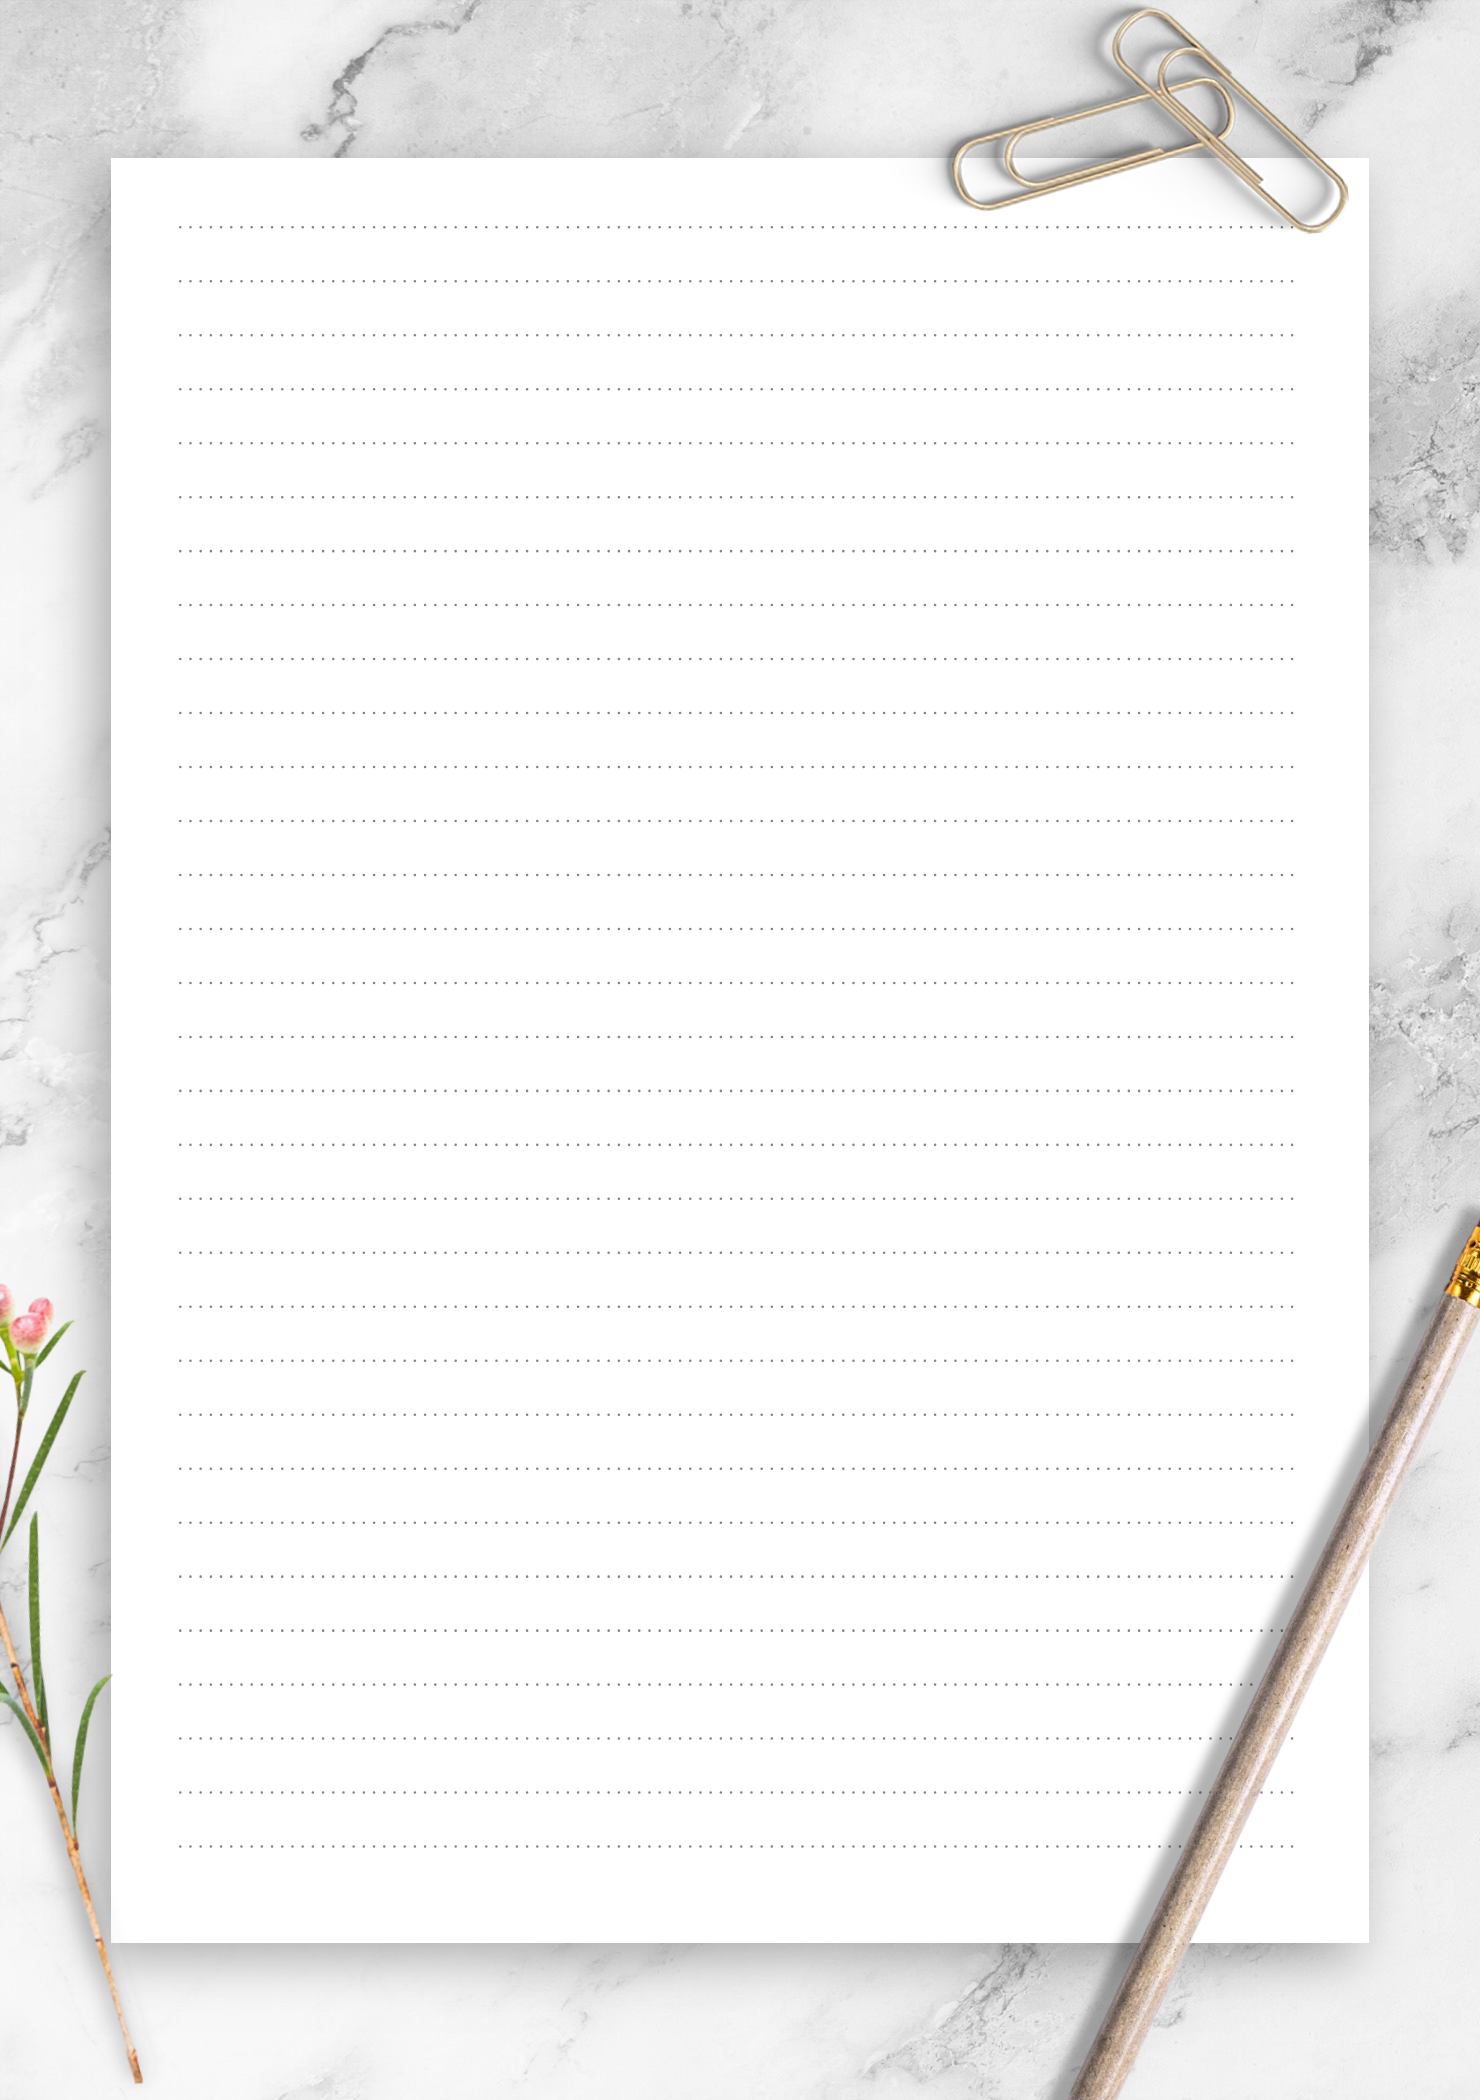 Printable Dotted Lined Paper with 6.35 mm line height. Choose page size and downlo. Printable lined paper, Free paper printables, Paper background design